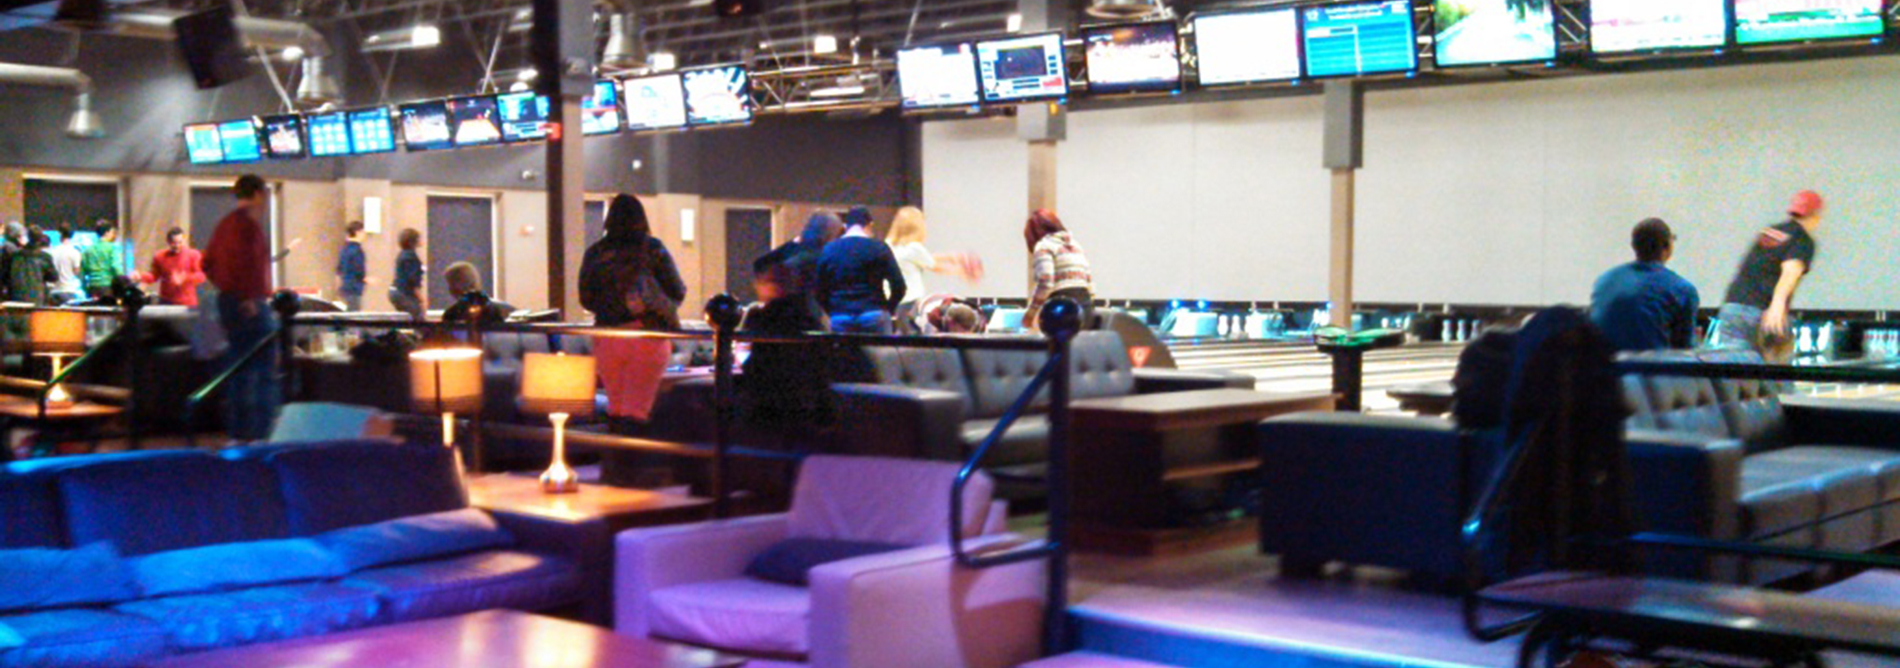 QUBICAAMF-bowling-boutique-Revolutions-banner.jpg